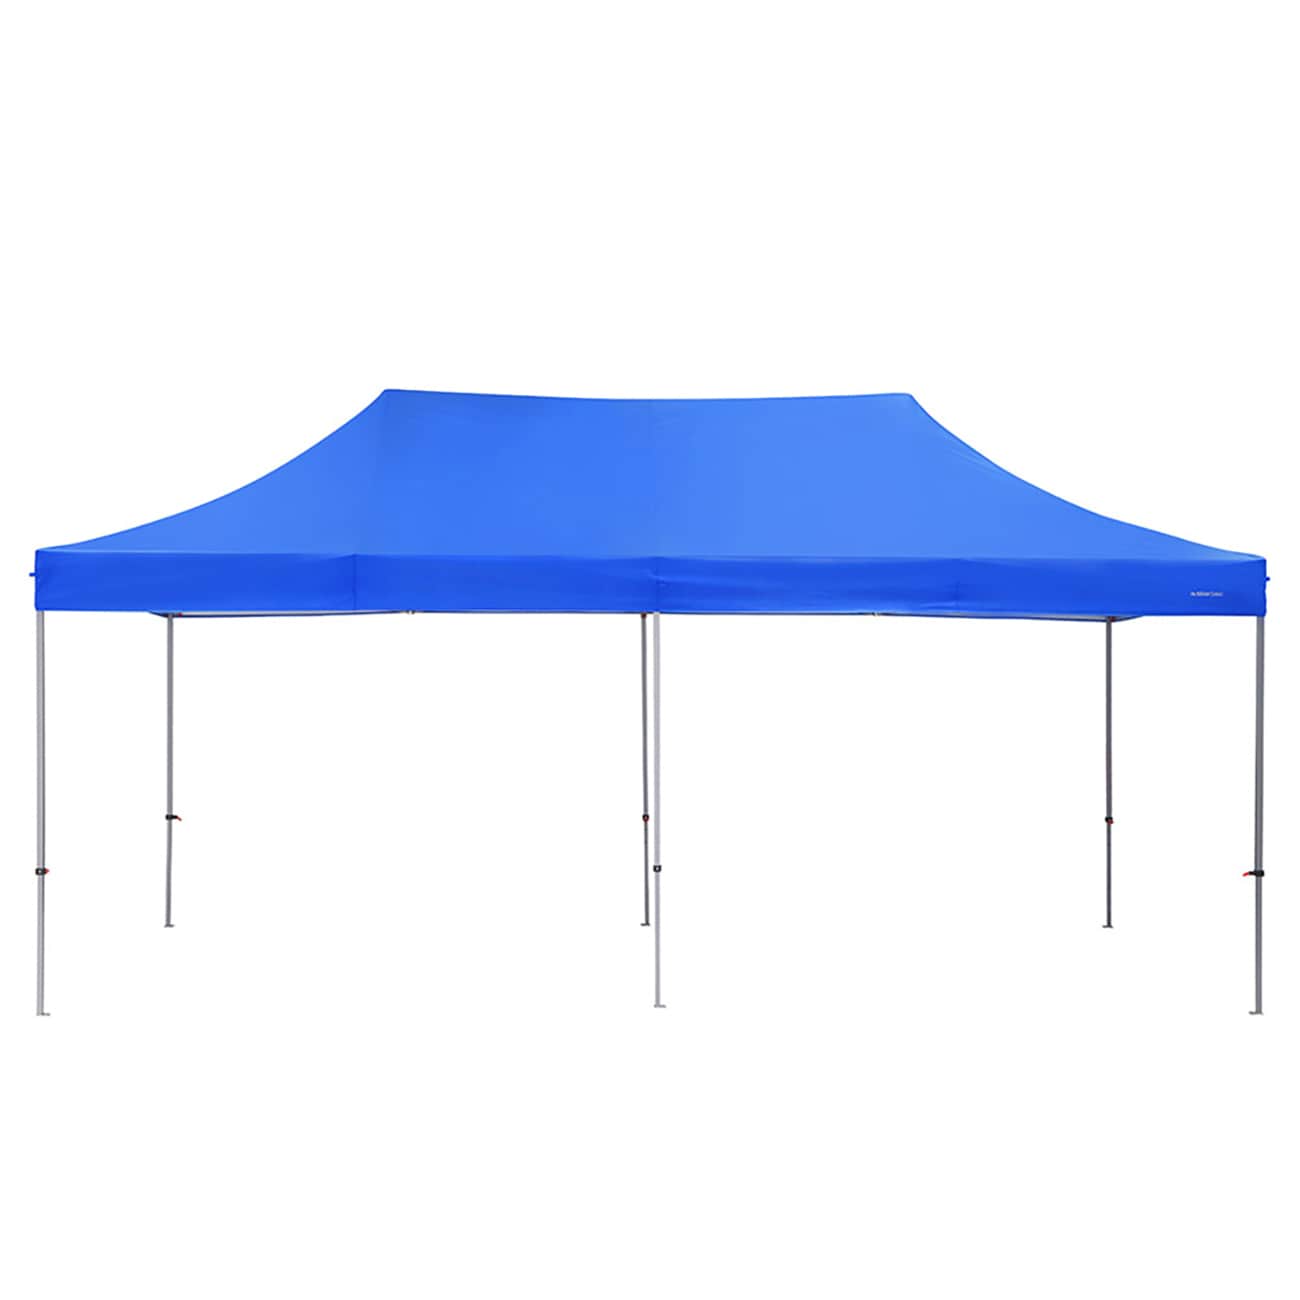 Canopy Storage Shelters at